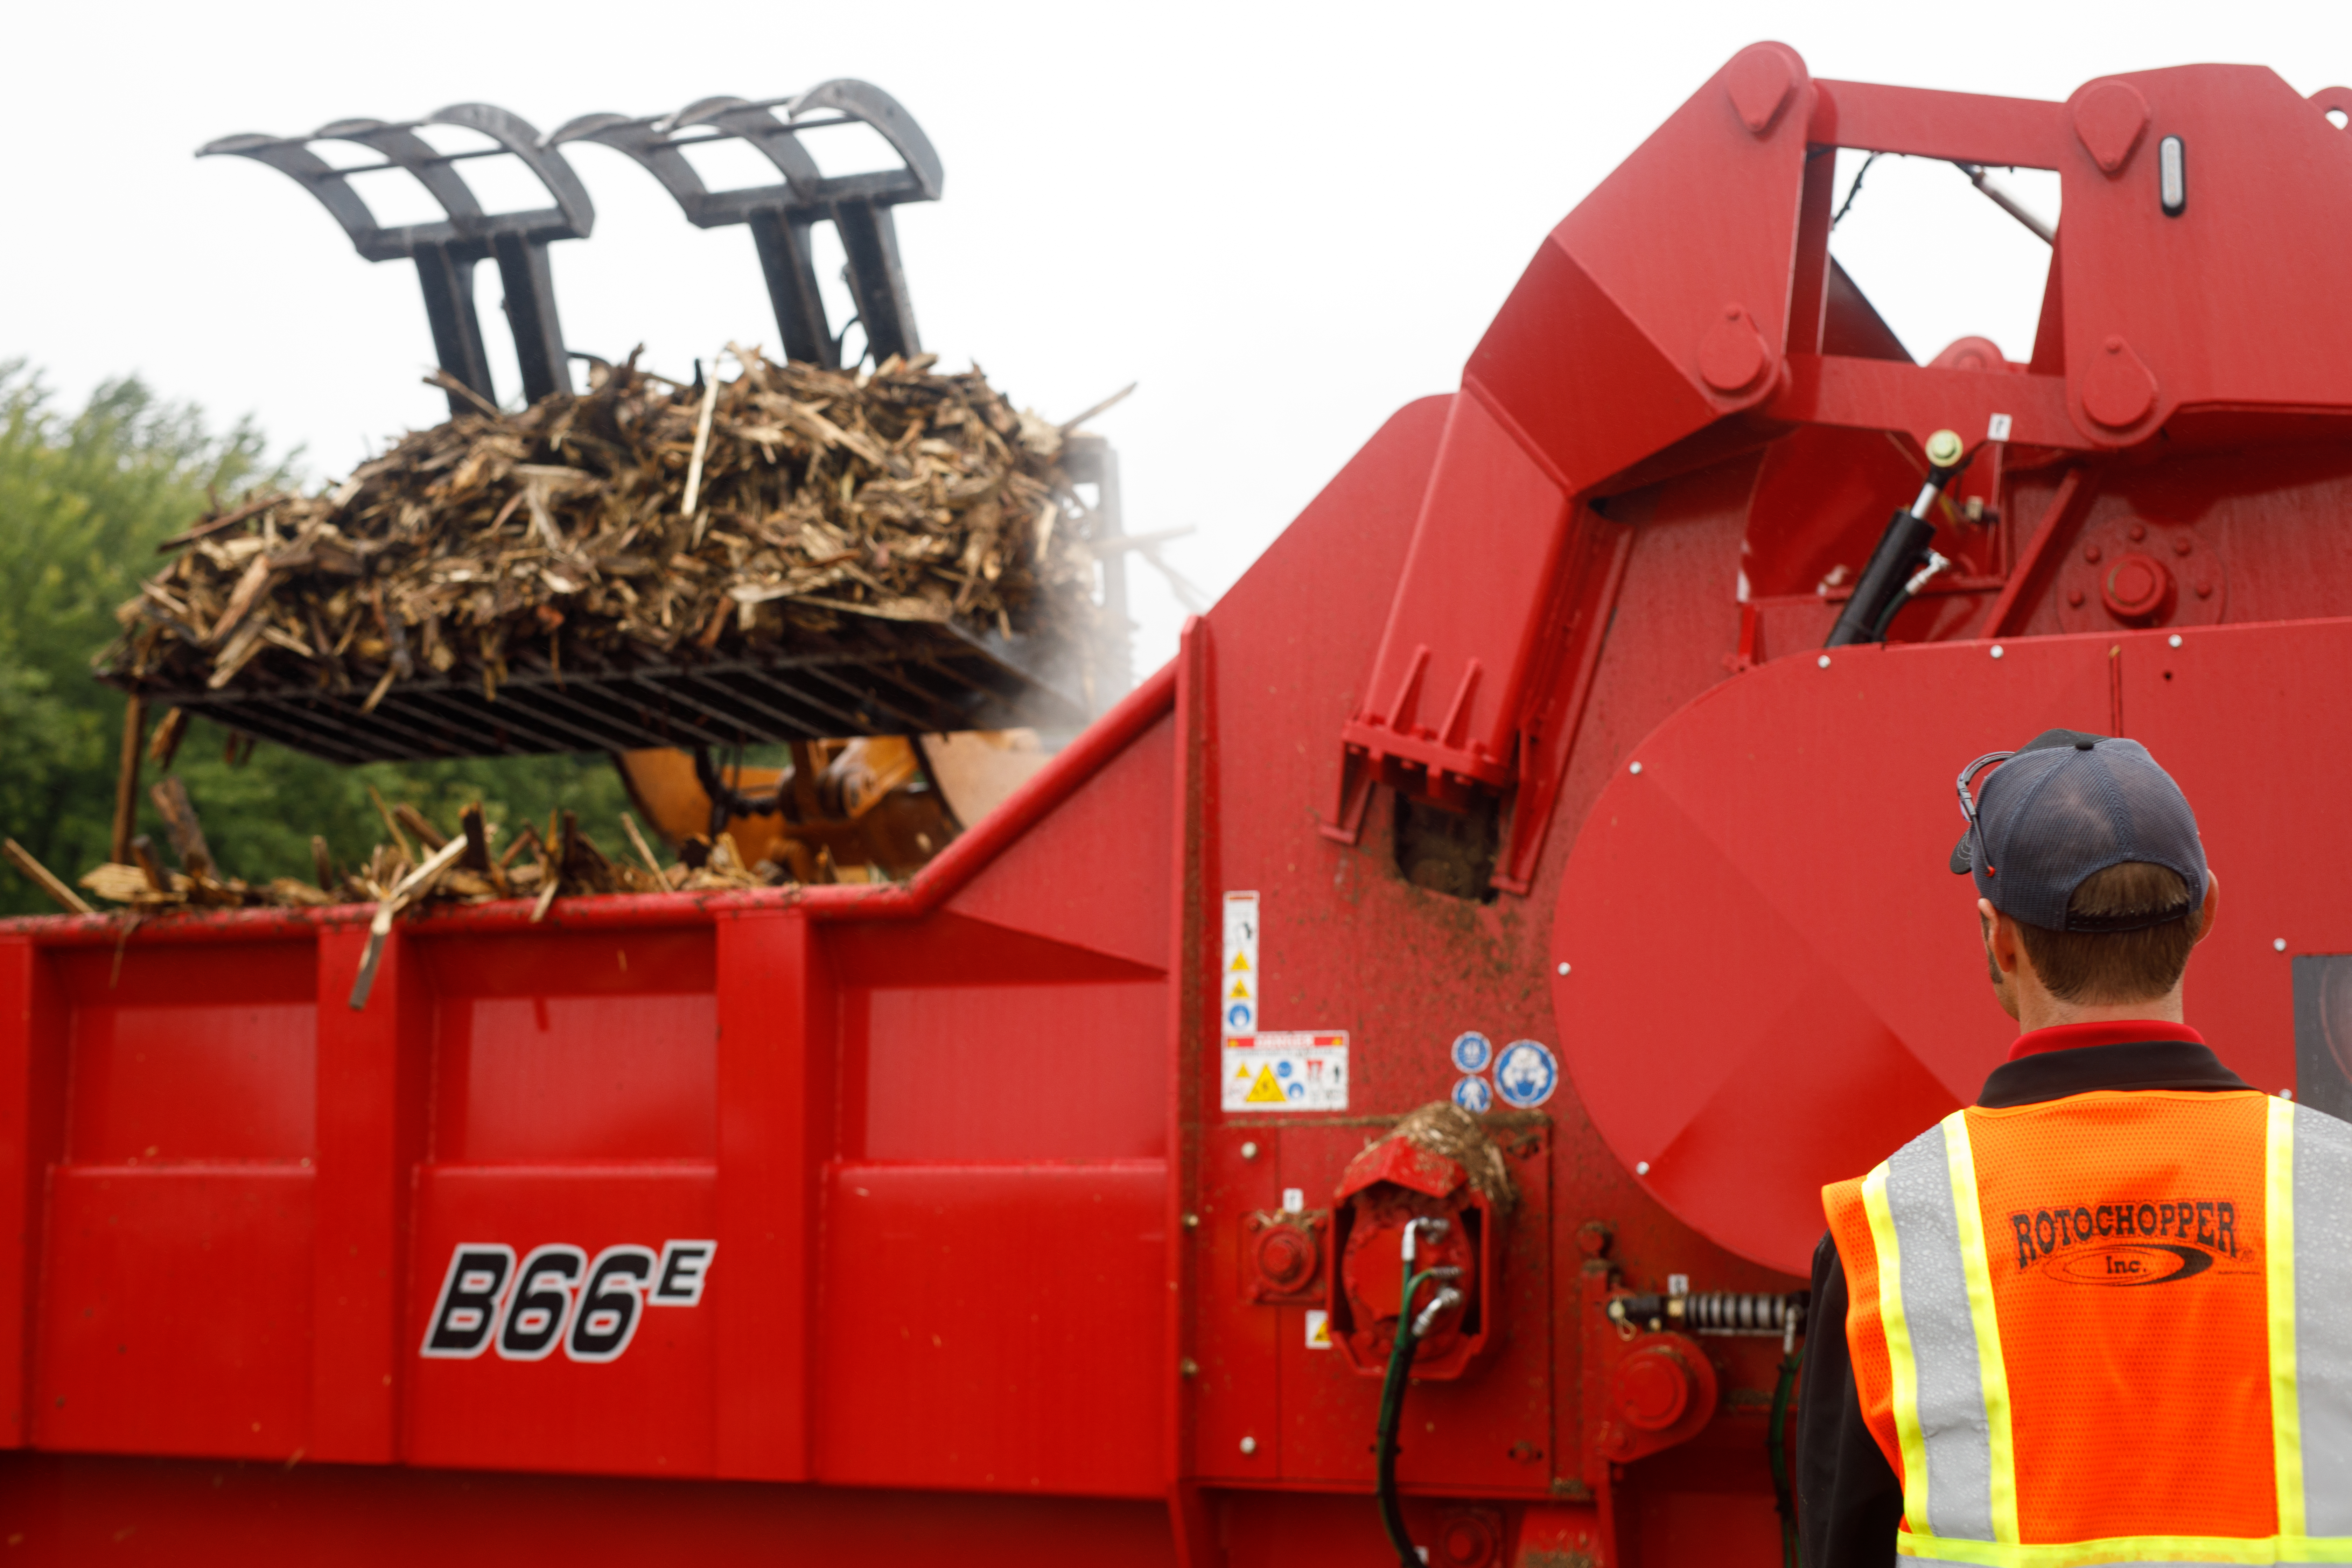 A B66 E series horizontal grinder receivng debris to be ground up for a demonstration at Rotochopper's demo day.